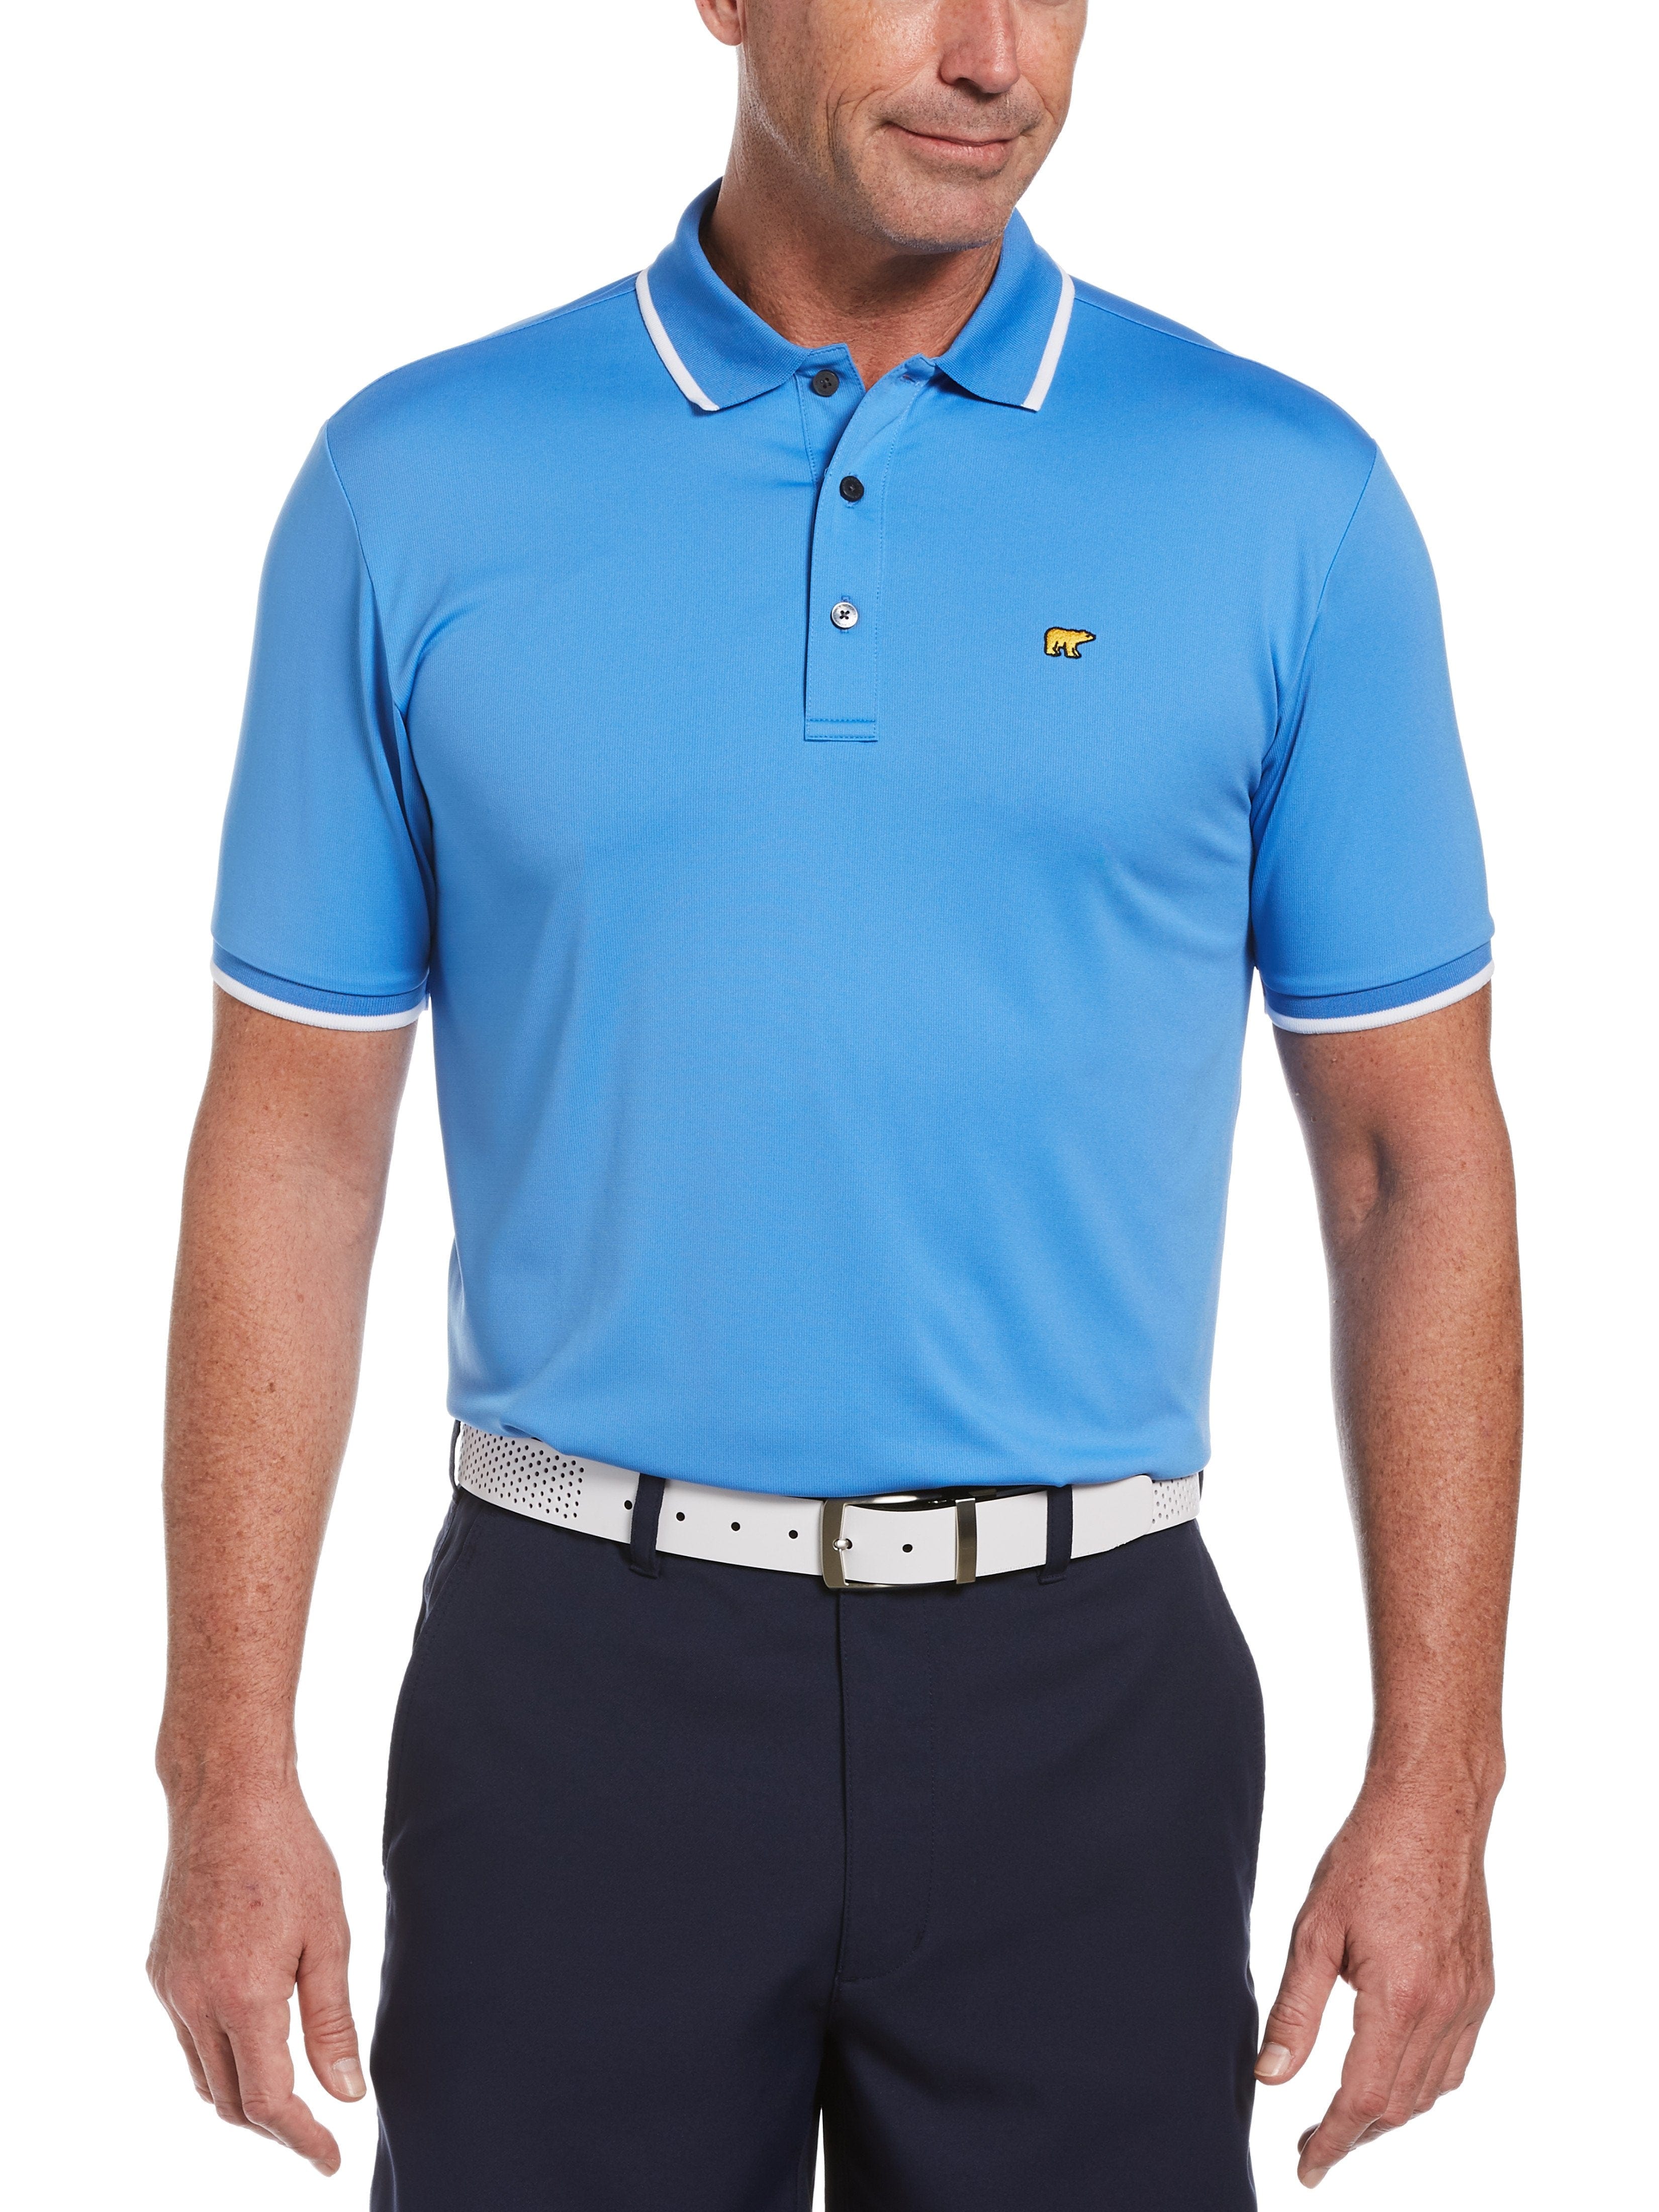 Jack Nicklaus Mens Solid Golf Polo Shirt w/ Cuff Tipping, Size XL, Blue Perennial, 100% Polyester | Golf Apparel Shop